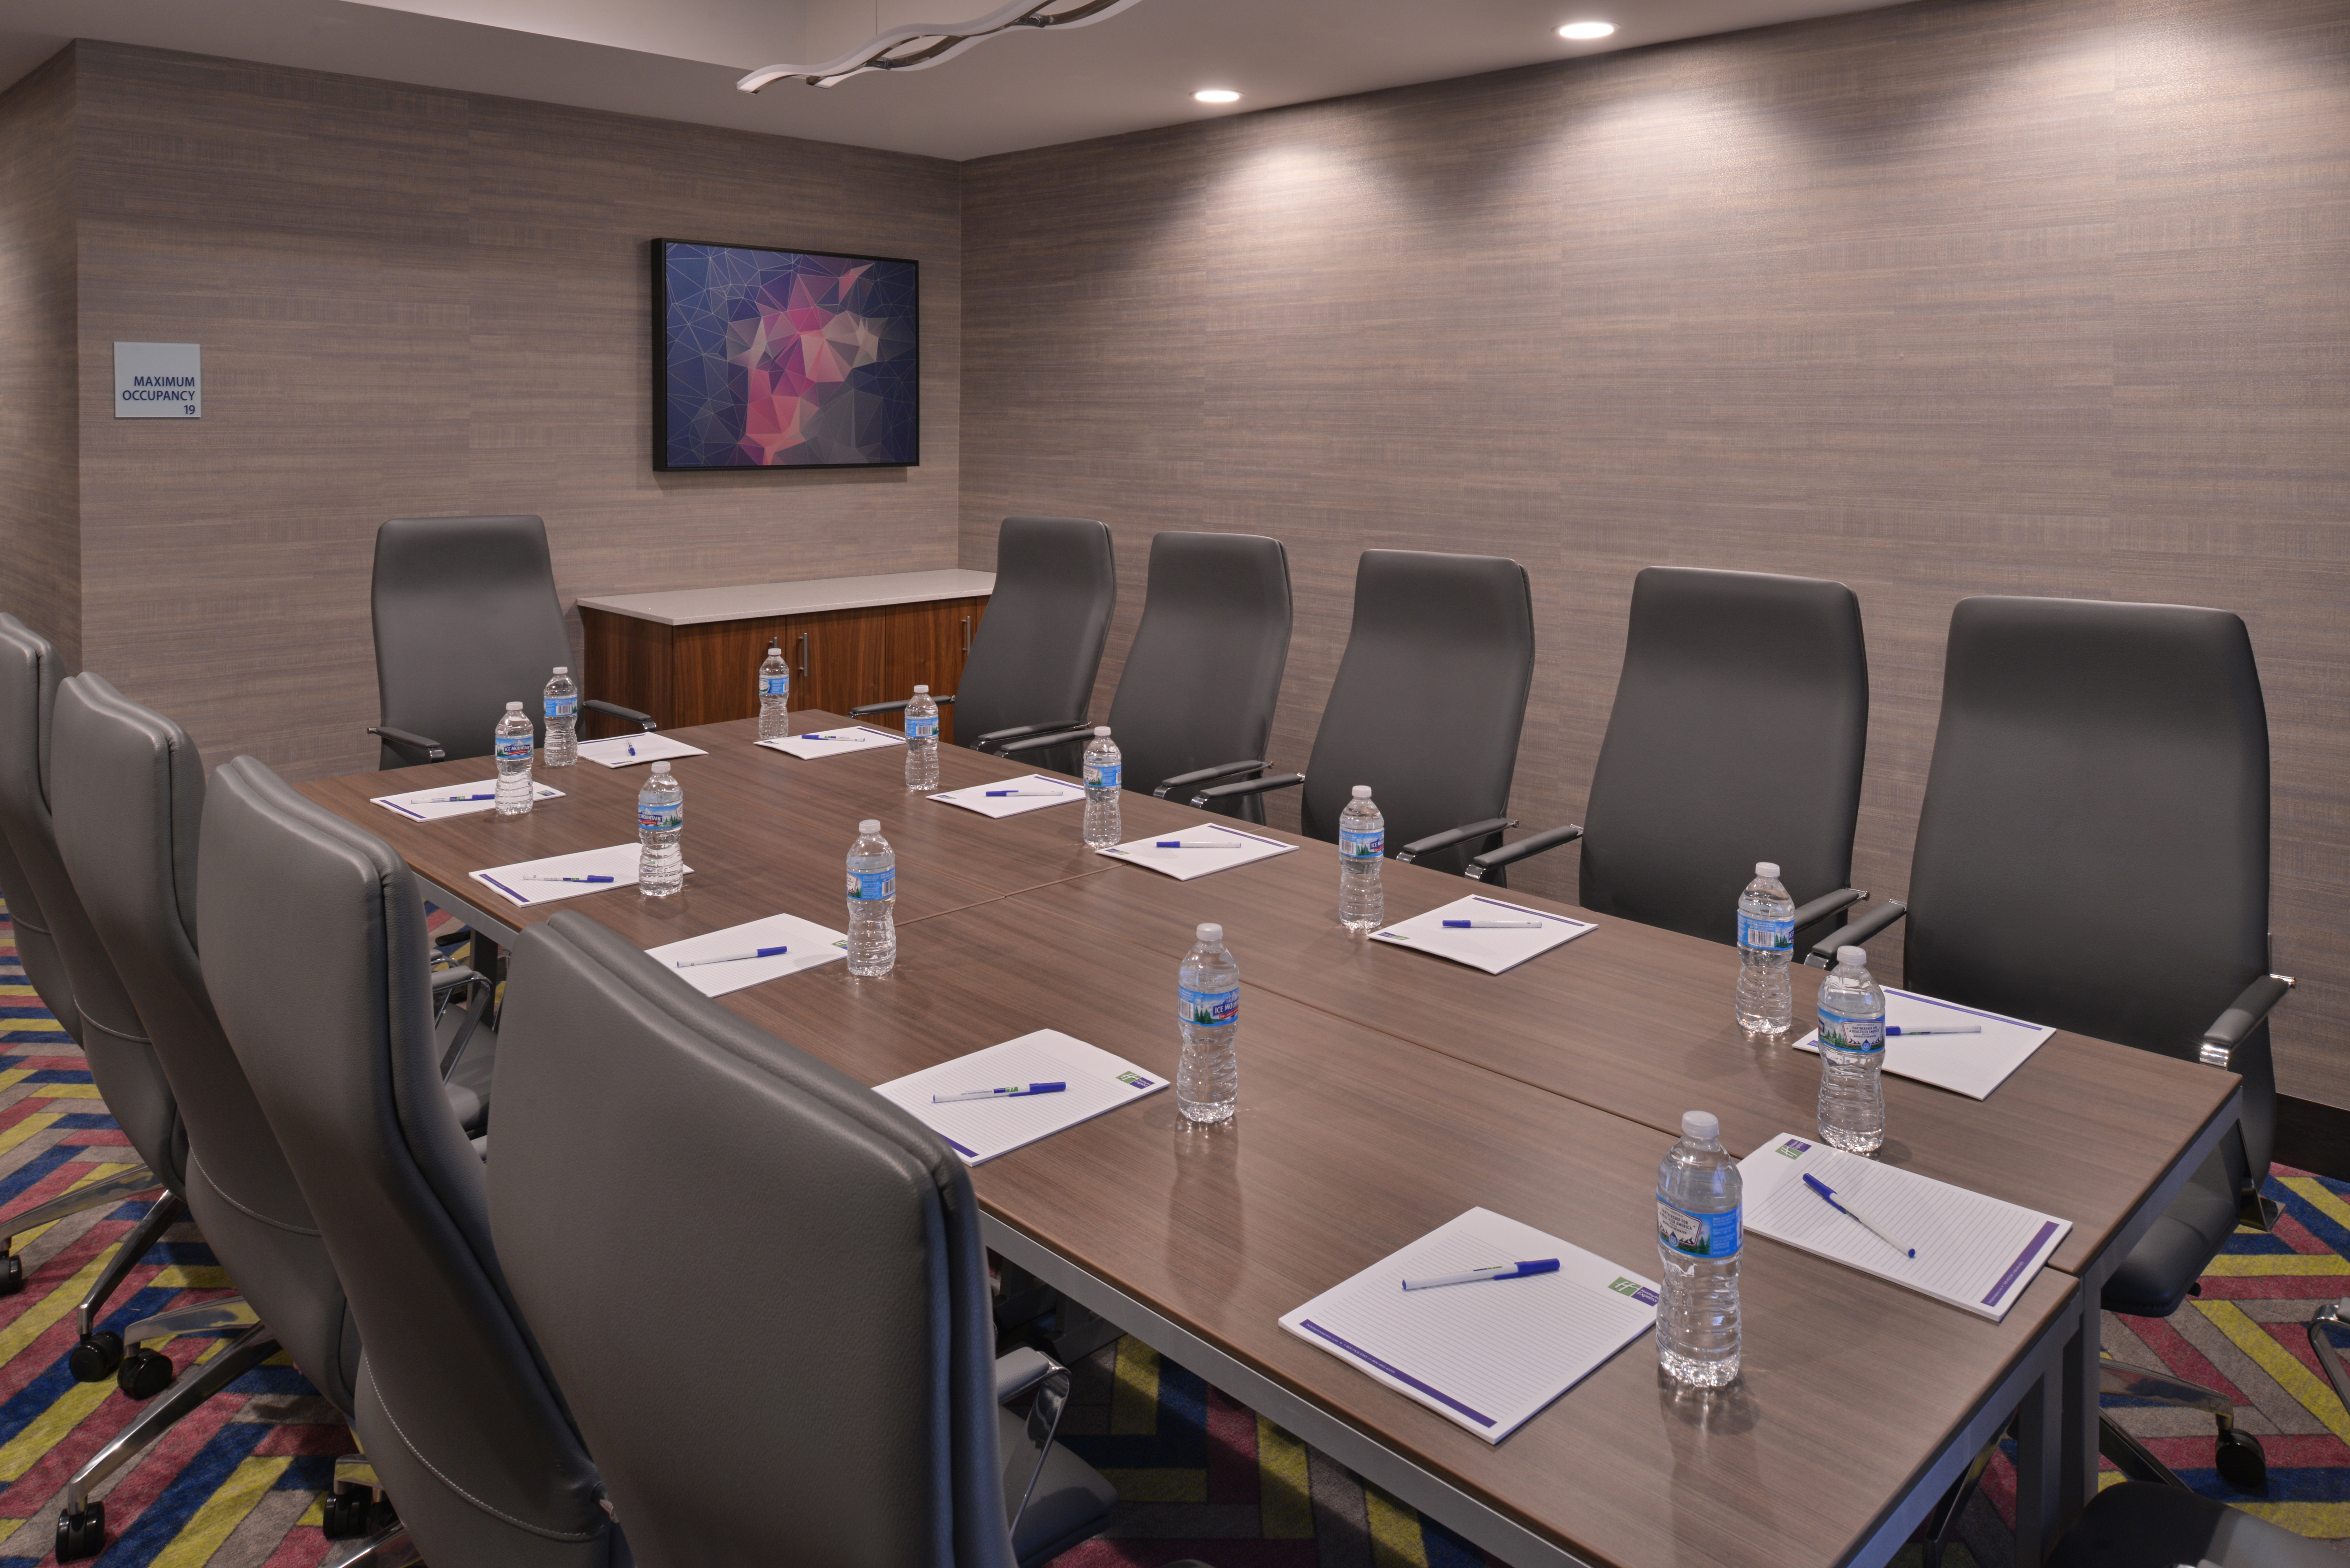 Meeting rooms available in boardroom style.